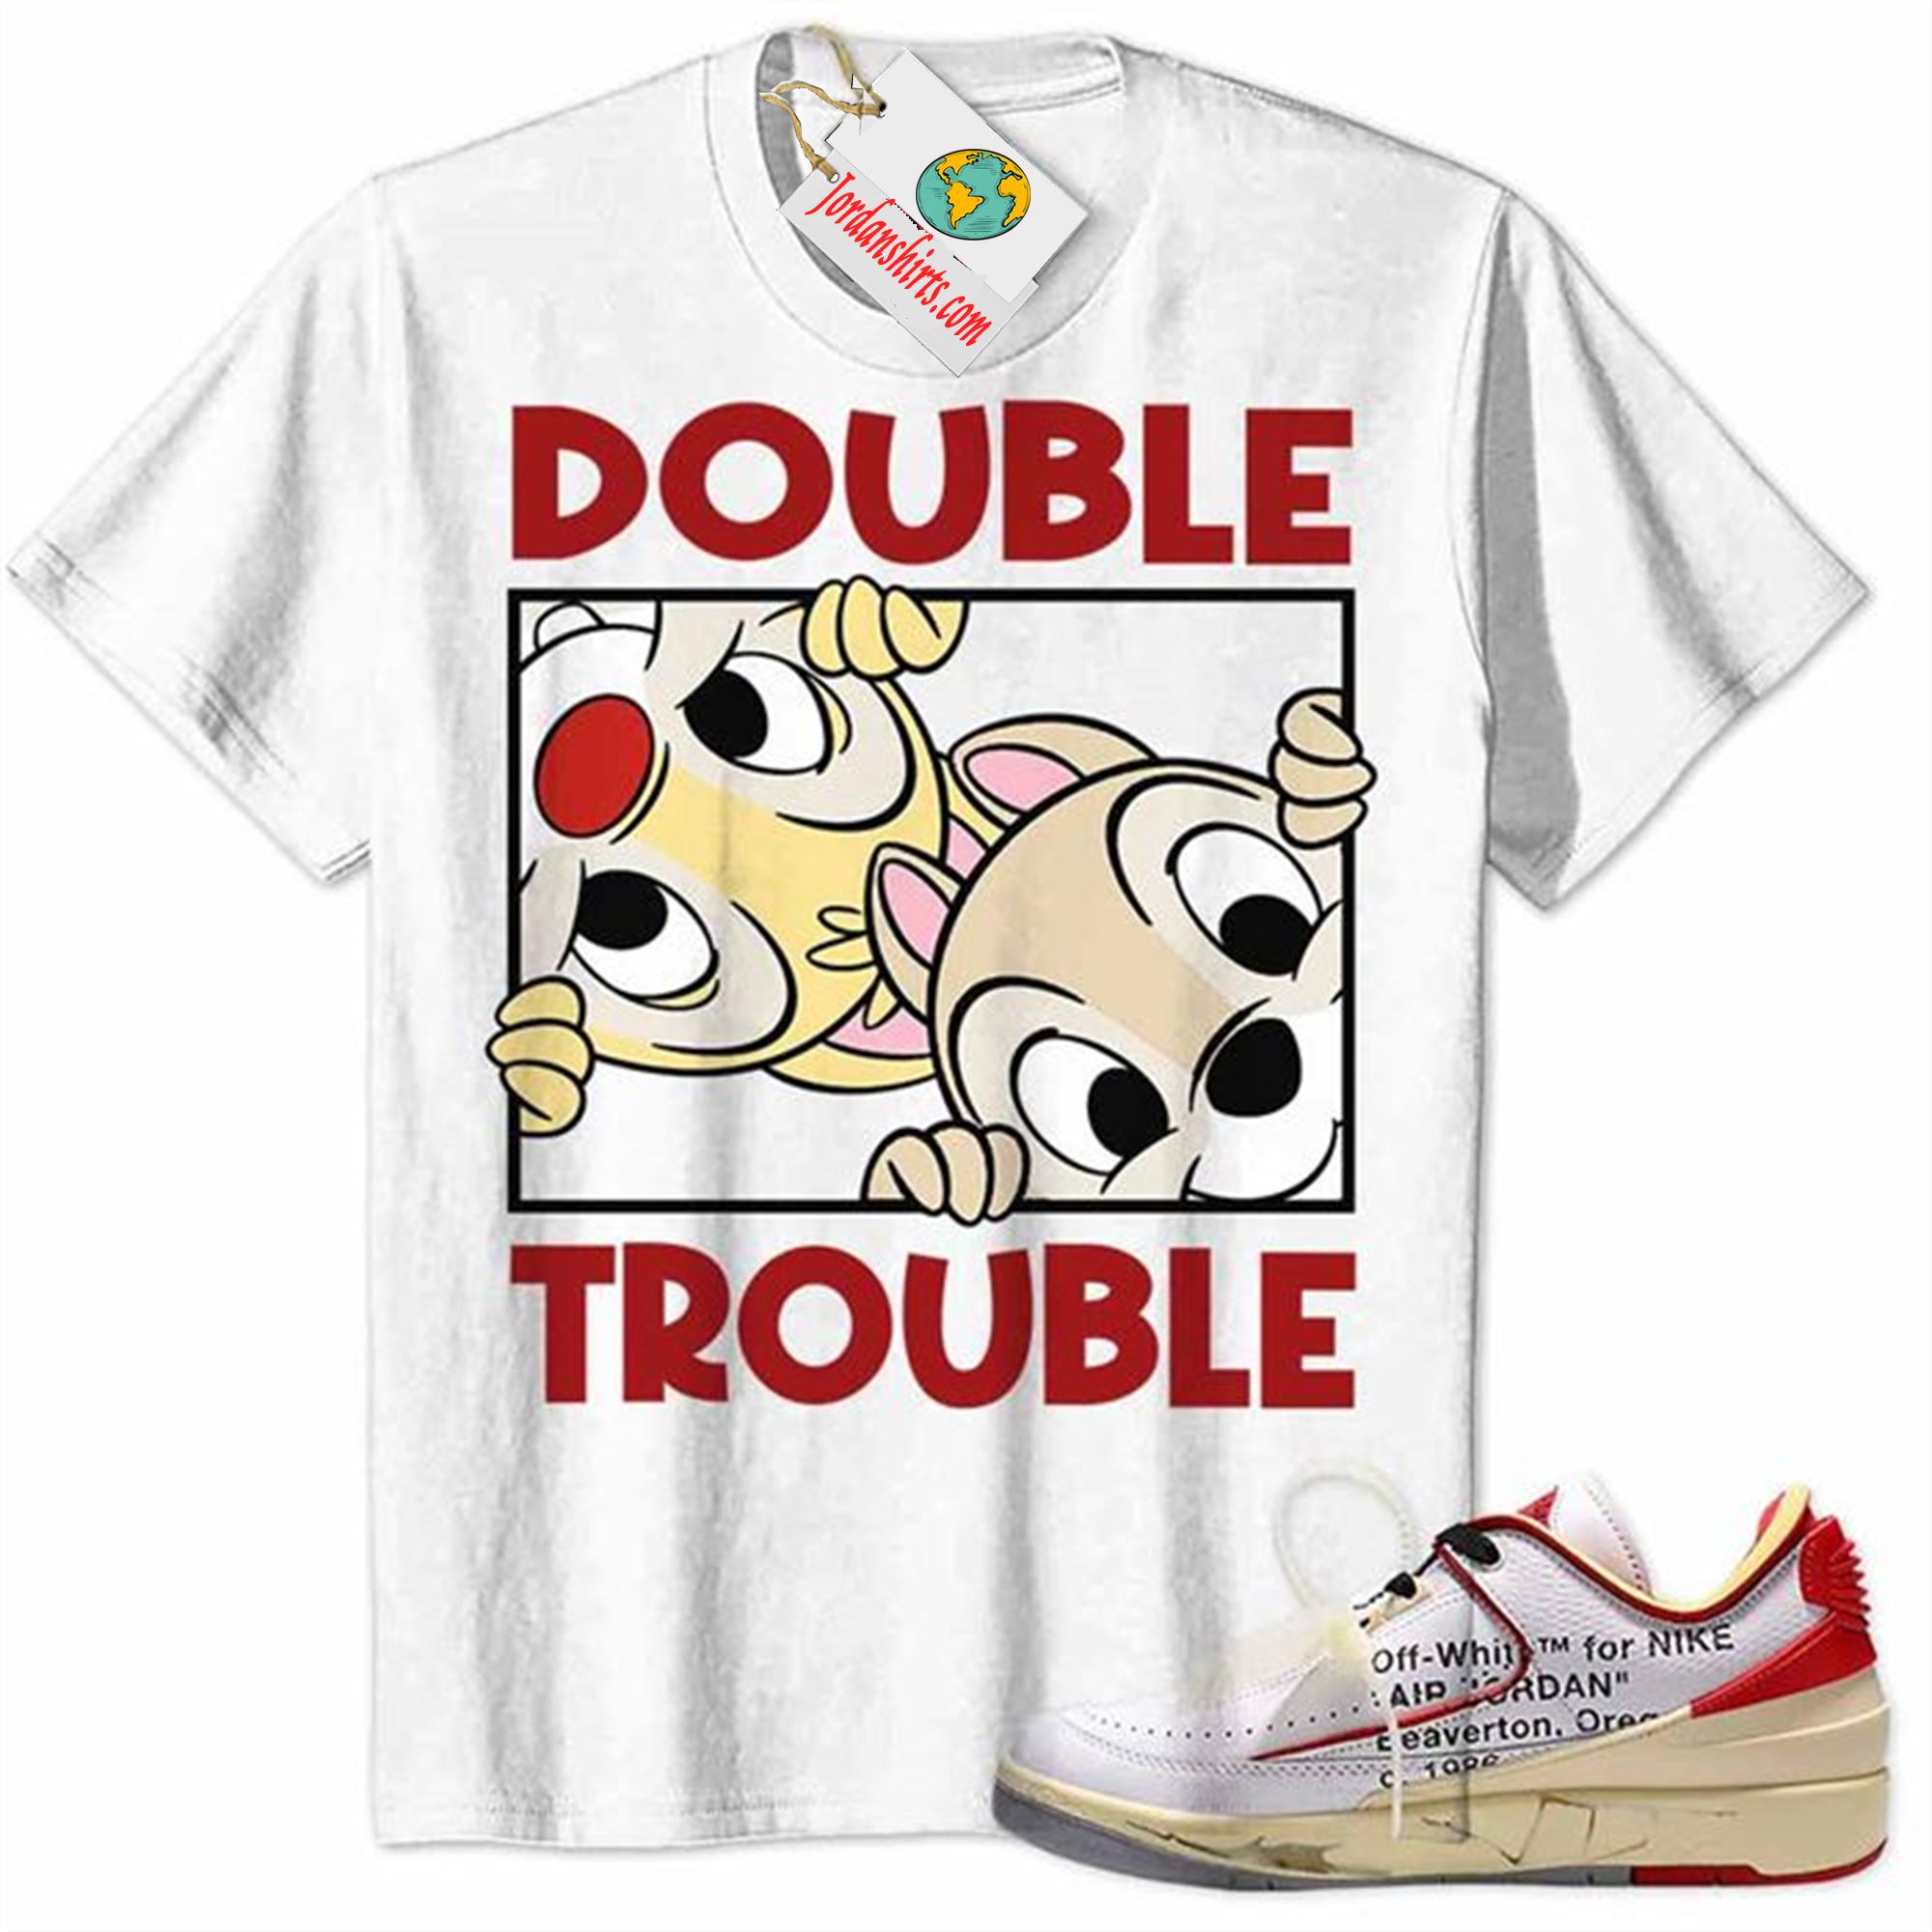 Jordan 2 Shirt, Double Trouble White Air Jordan 2 Low White Red Off-white 2s Size Up To 5xl